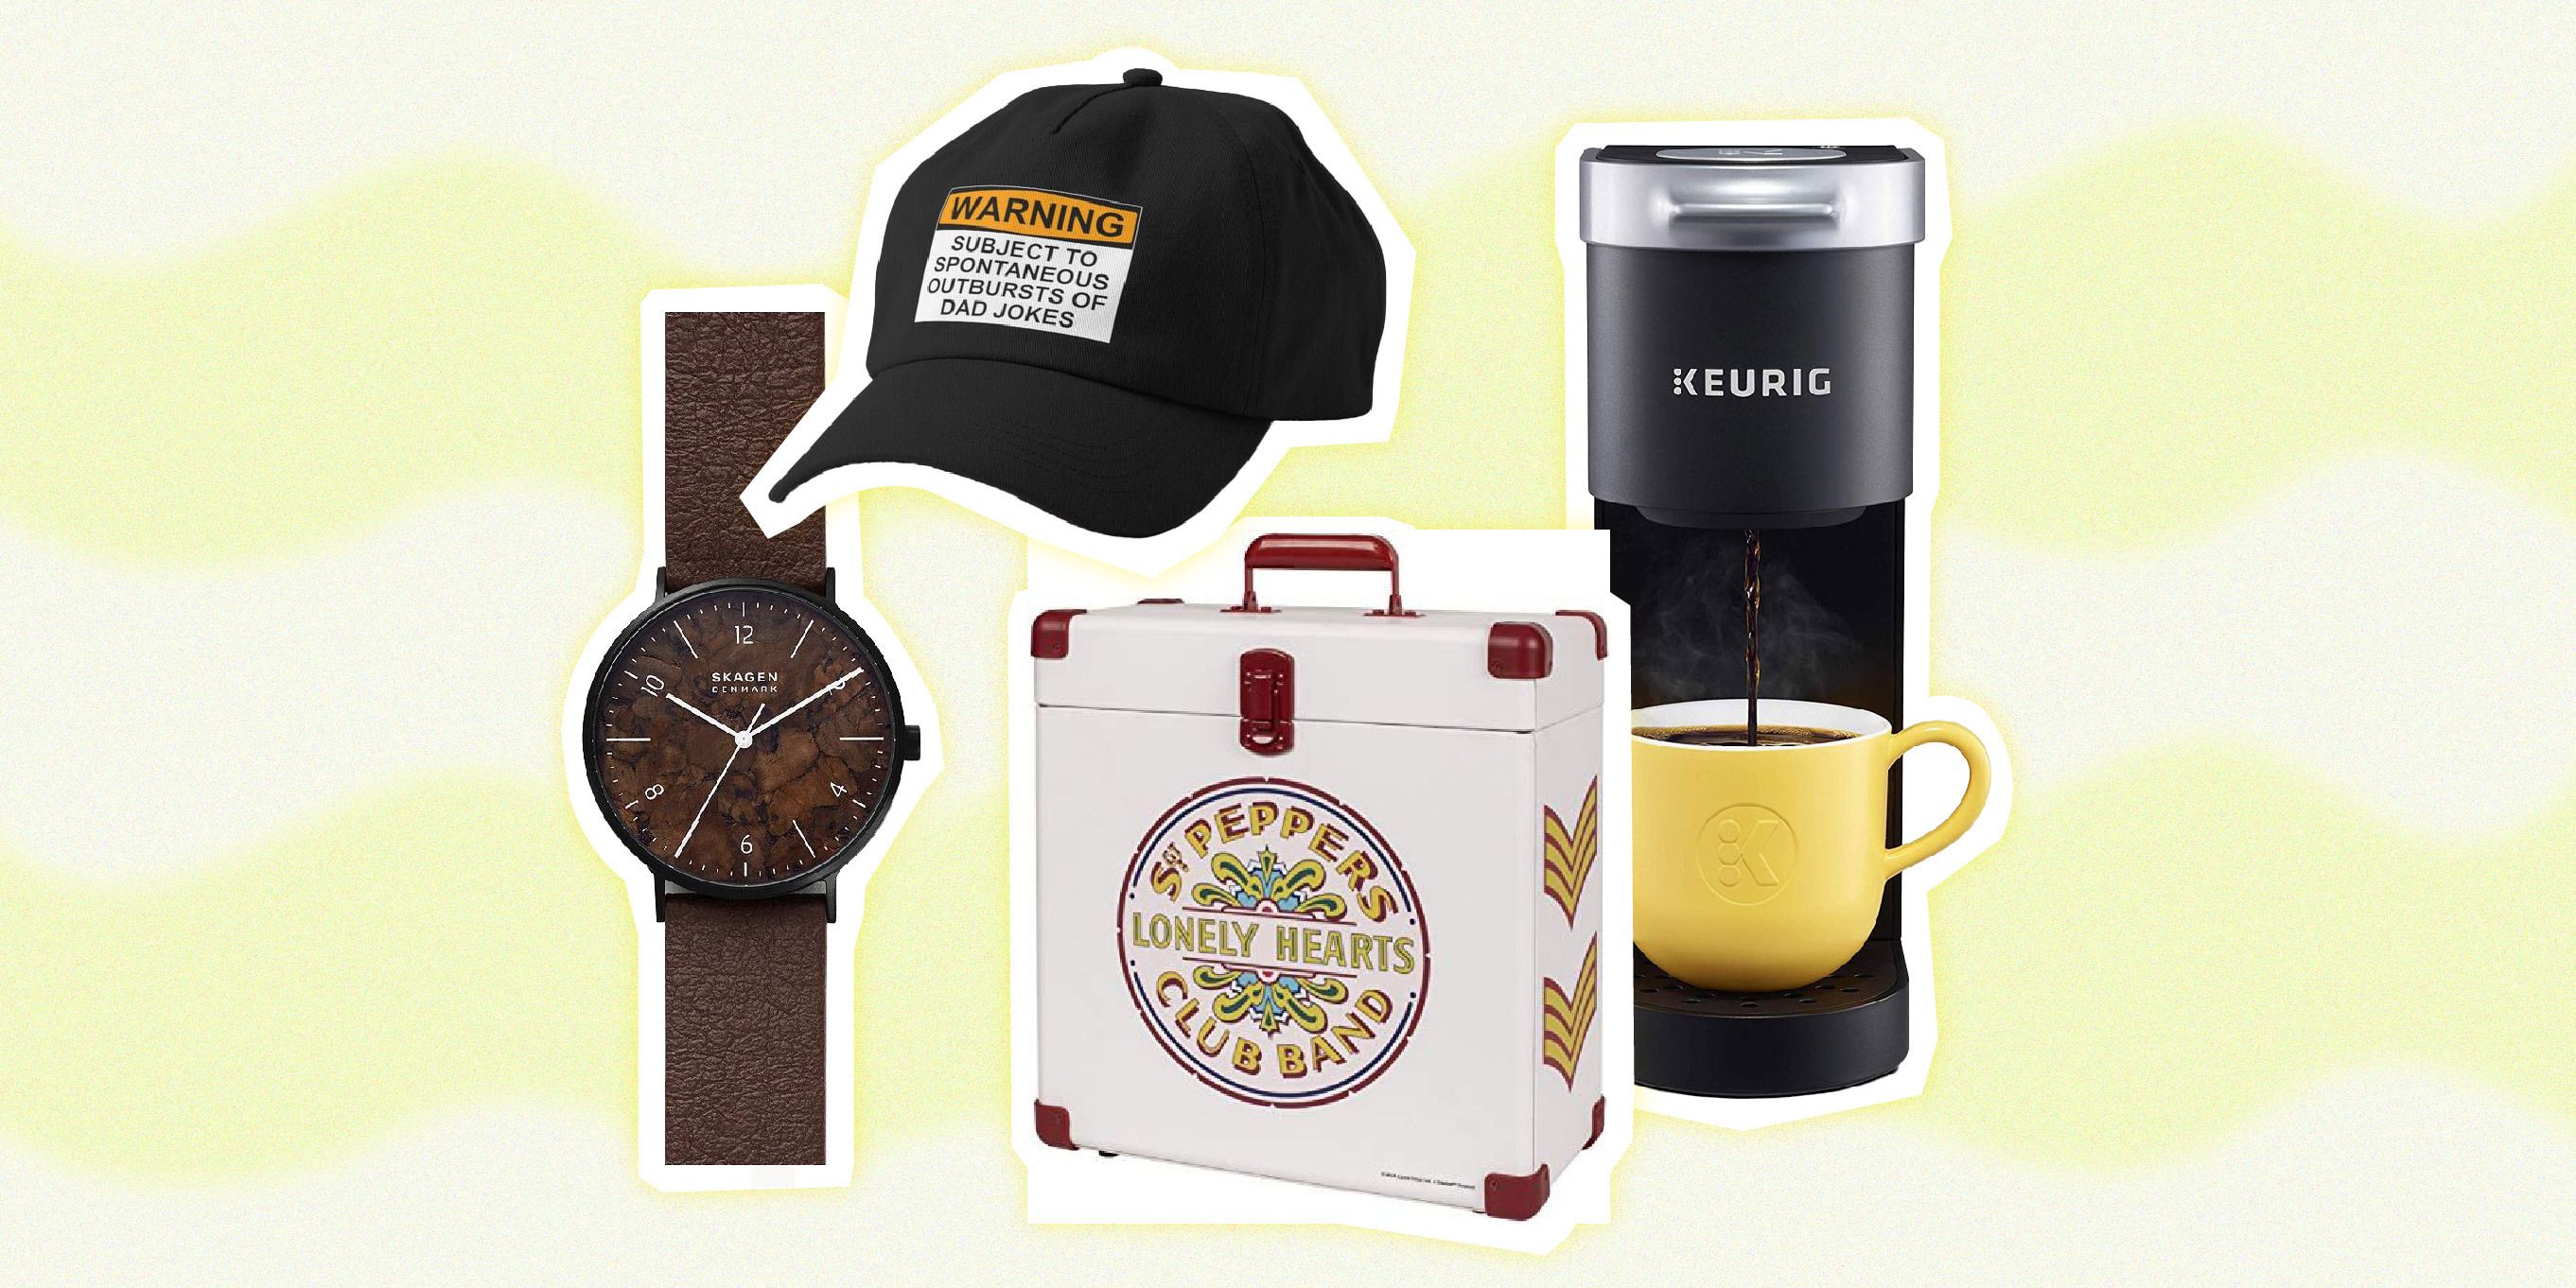 Top Shooting Gifts for Dad That Are Sure to Hit The Mark - Vedder Holsters